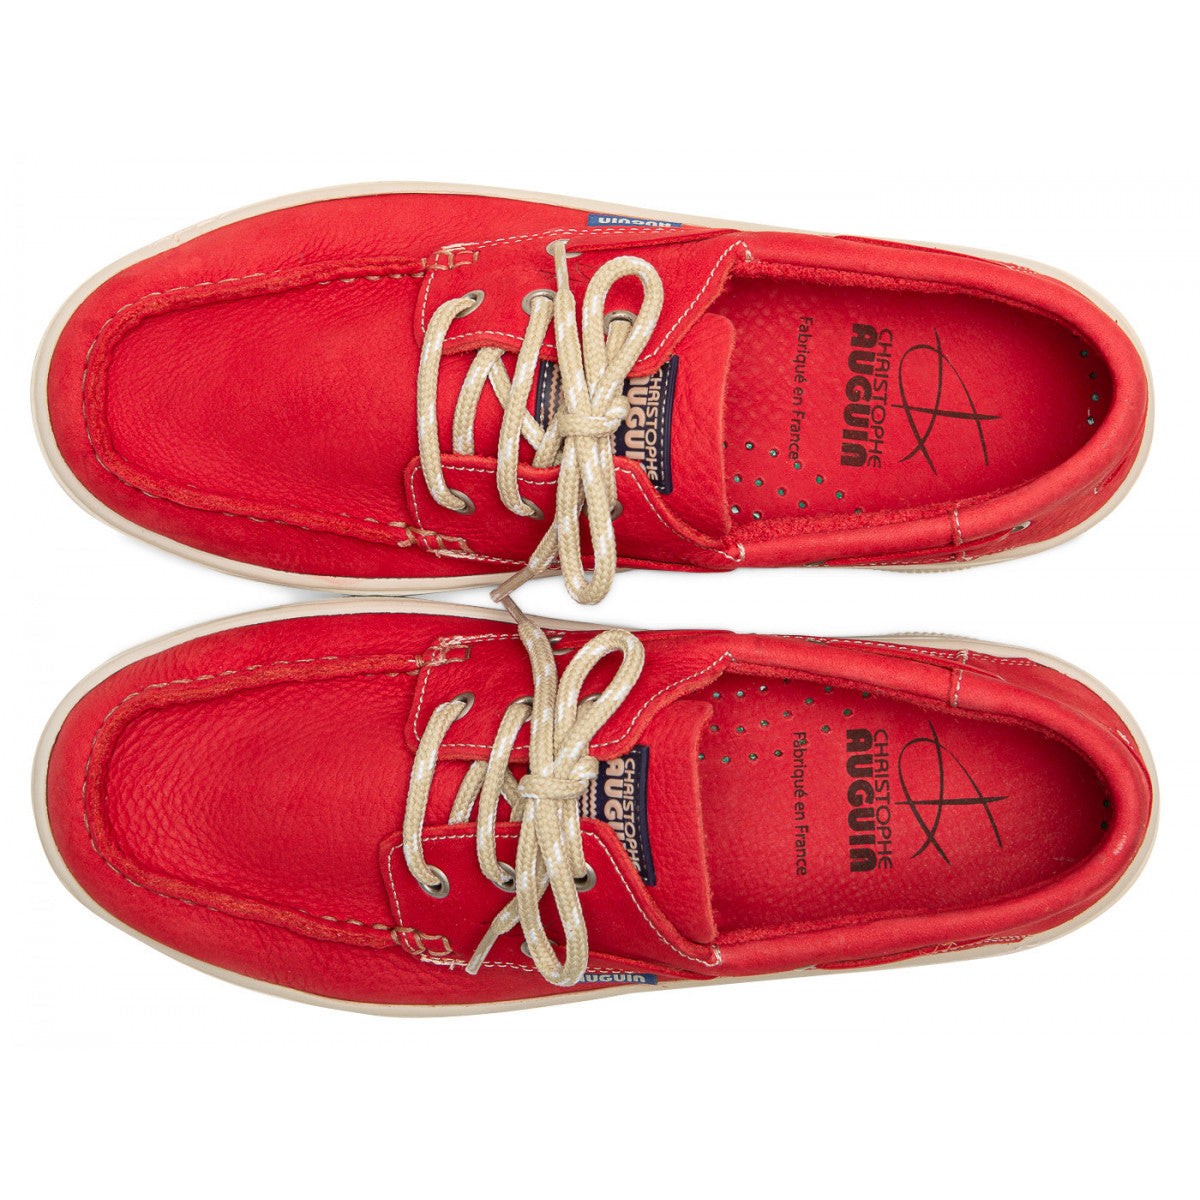 Christophe Auguin French Boat Shoe in Rouge Red - Mitchell McCabe Menswear